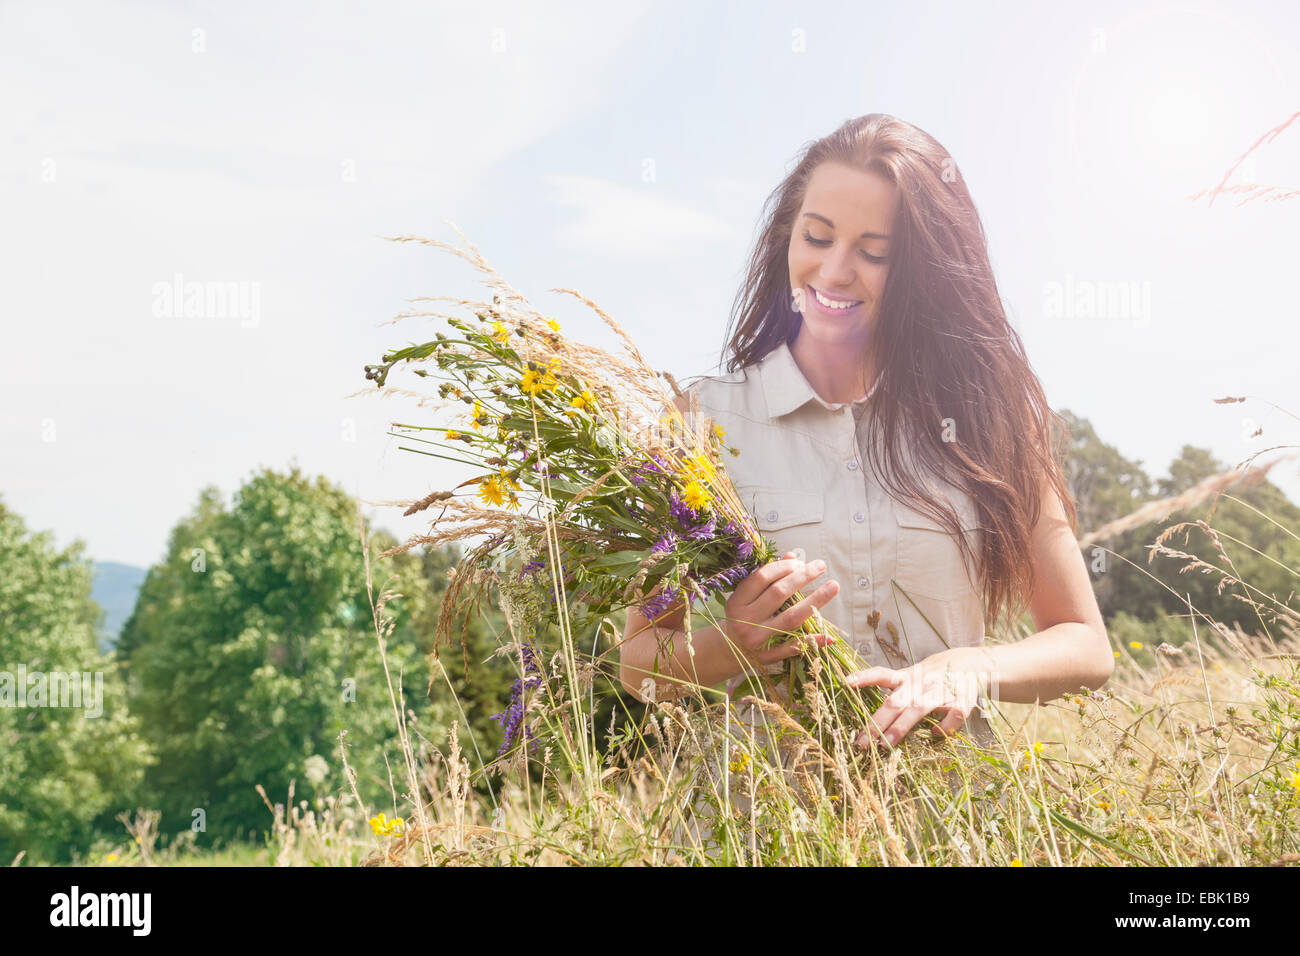 Young woman holding bunch of fresh picked wildflowers in field Stock Photo